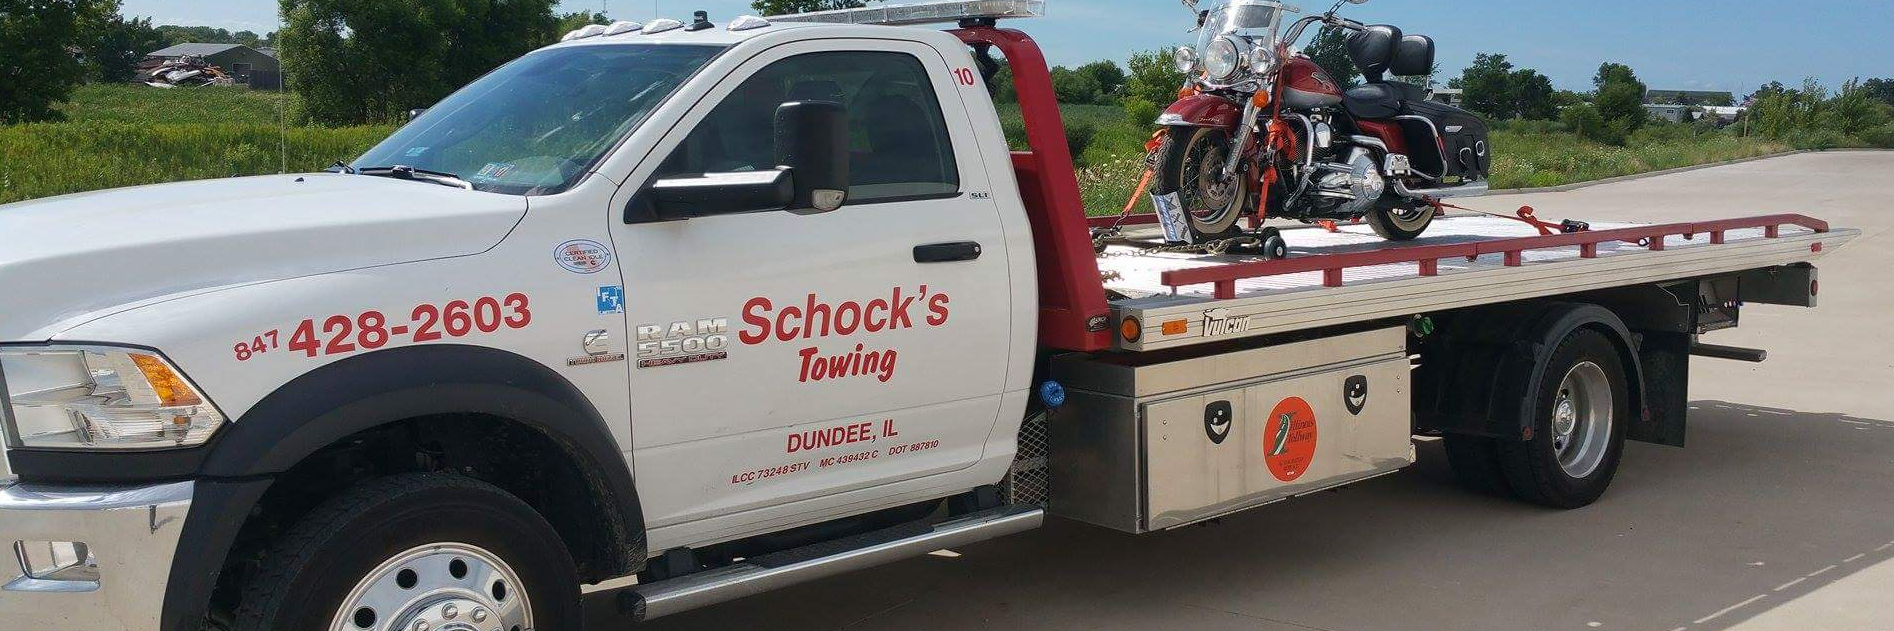 Schock's Towing Service Inc. Towing.com Profile Banner